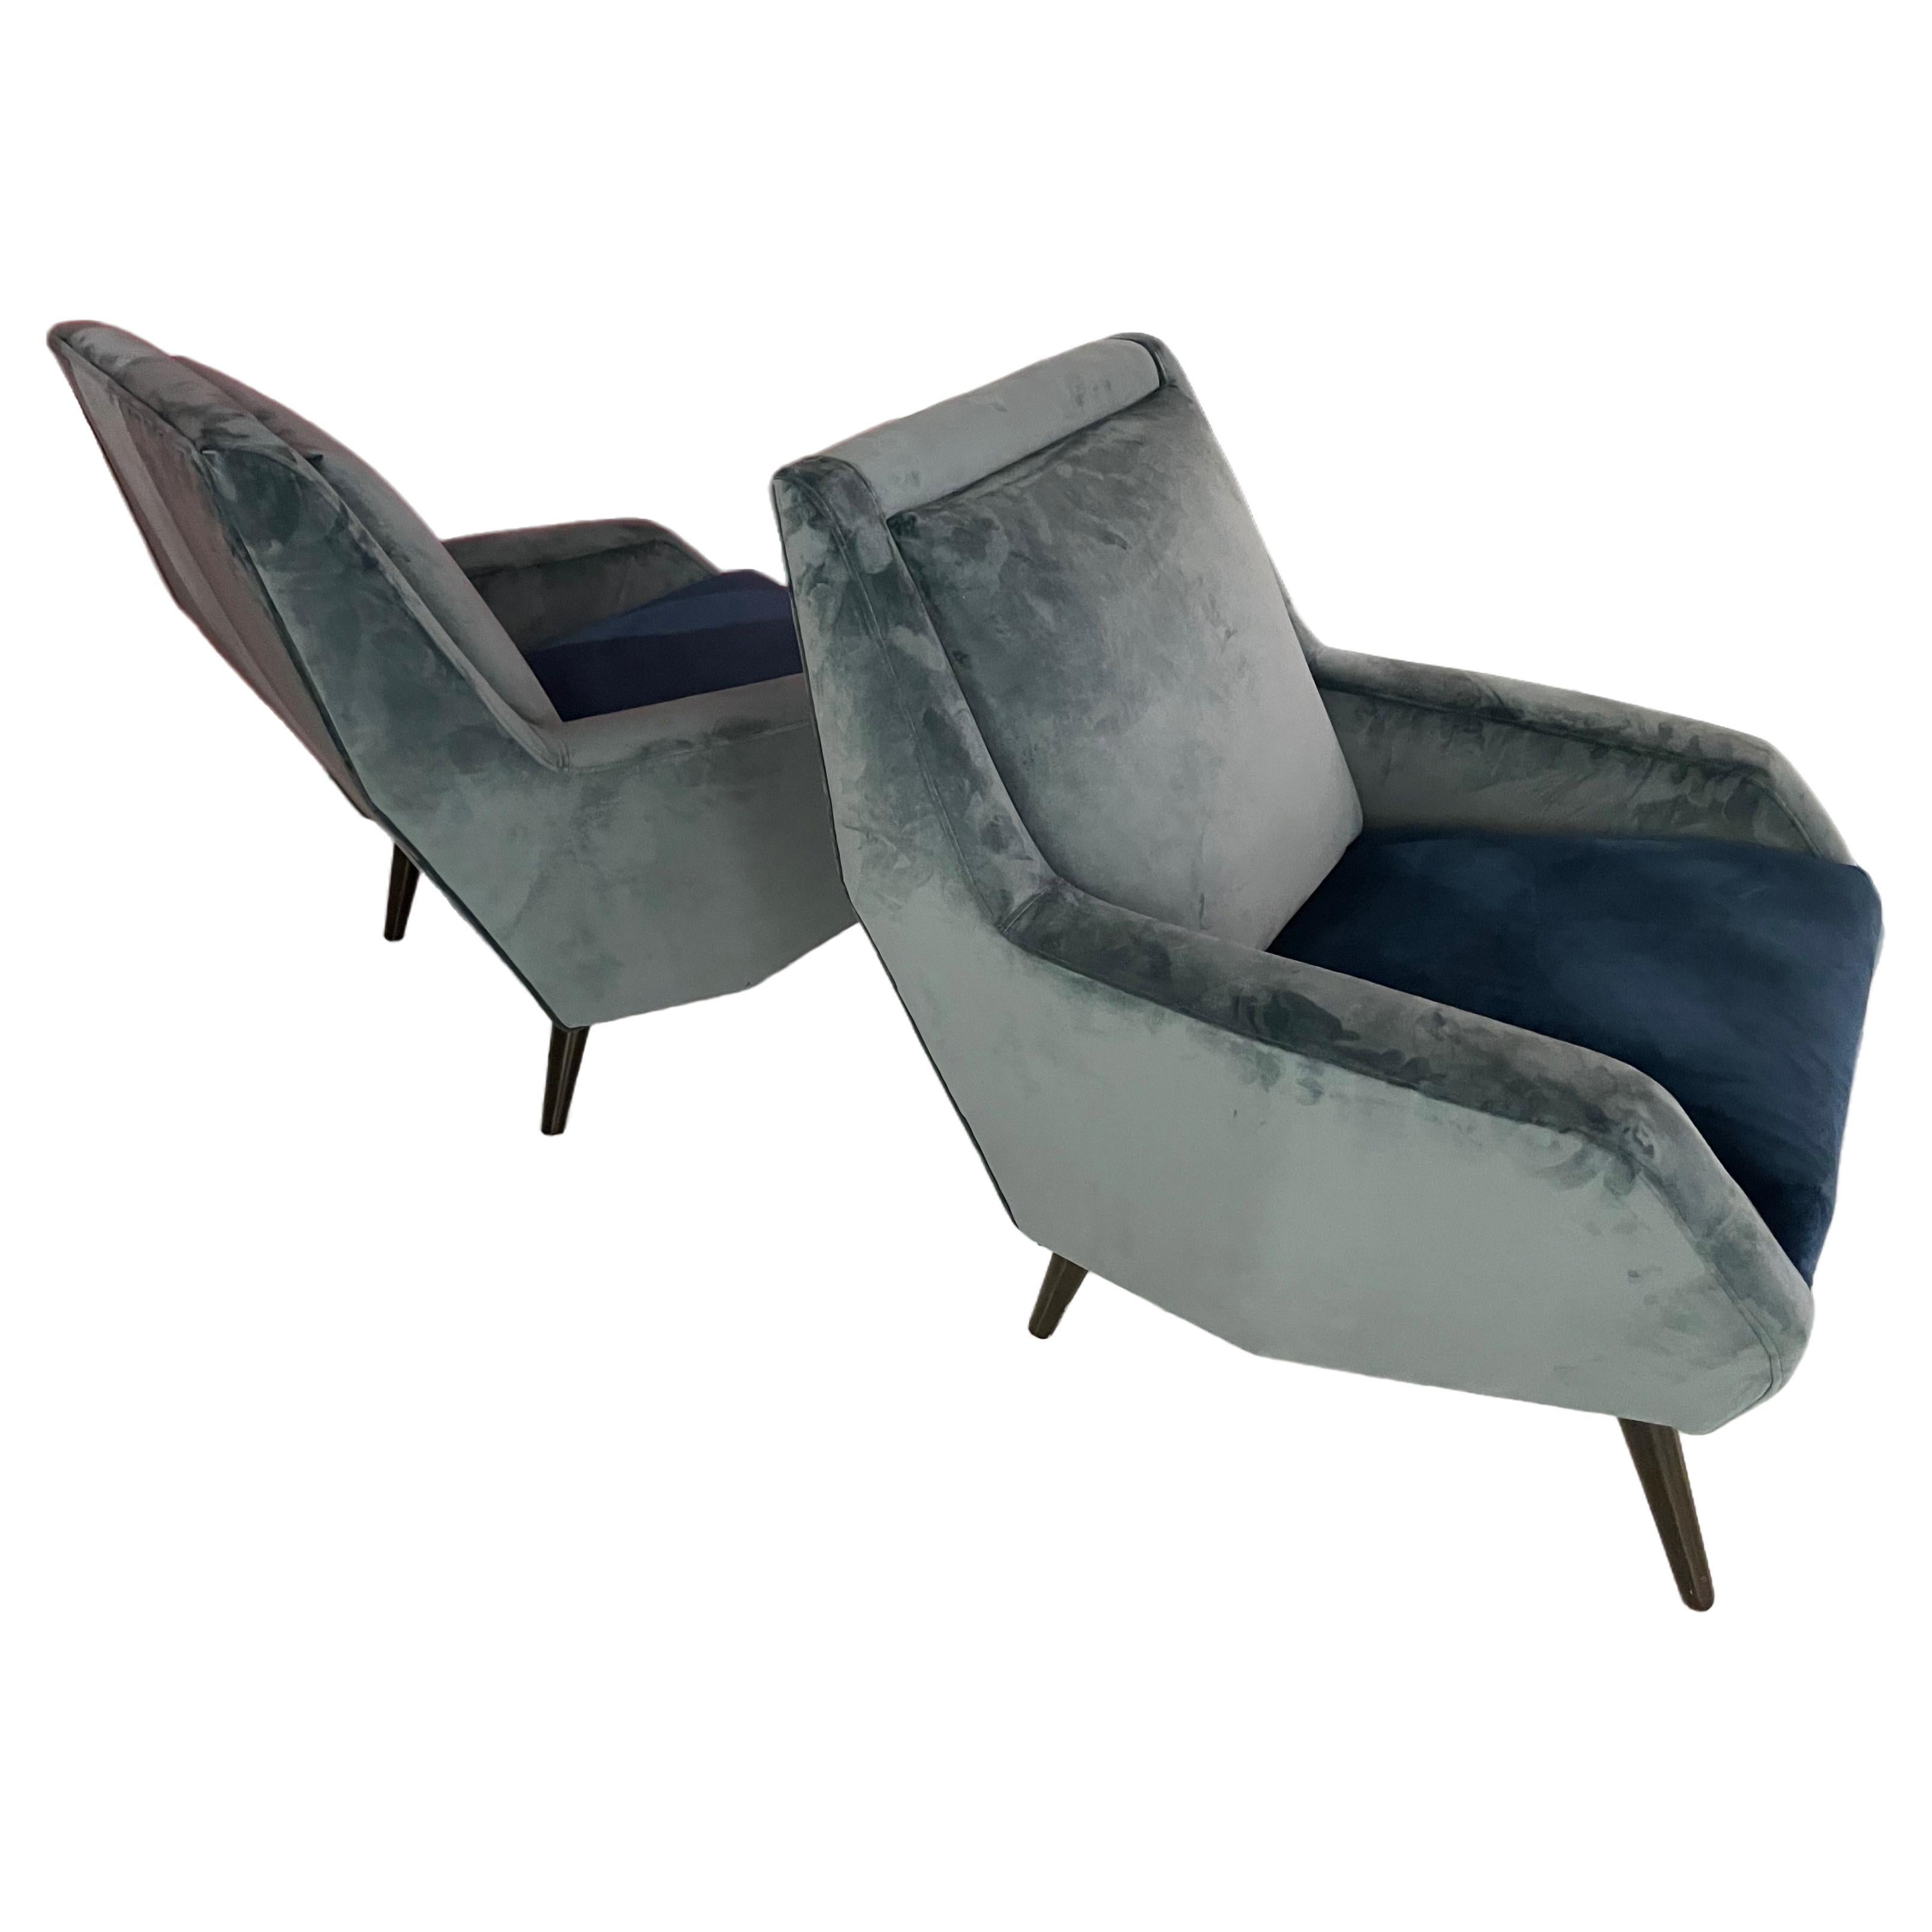 Pair of Carlo de Carli Armchairs With Velvet Upholstery for Cassina, Italy 1954.